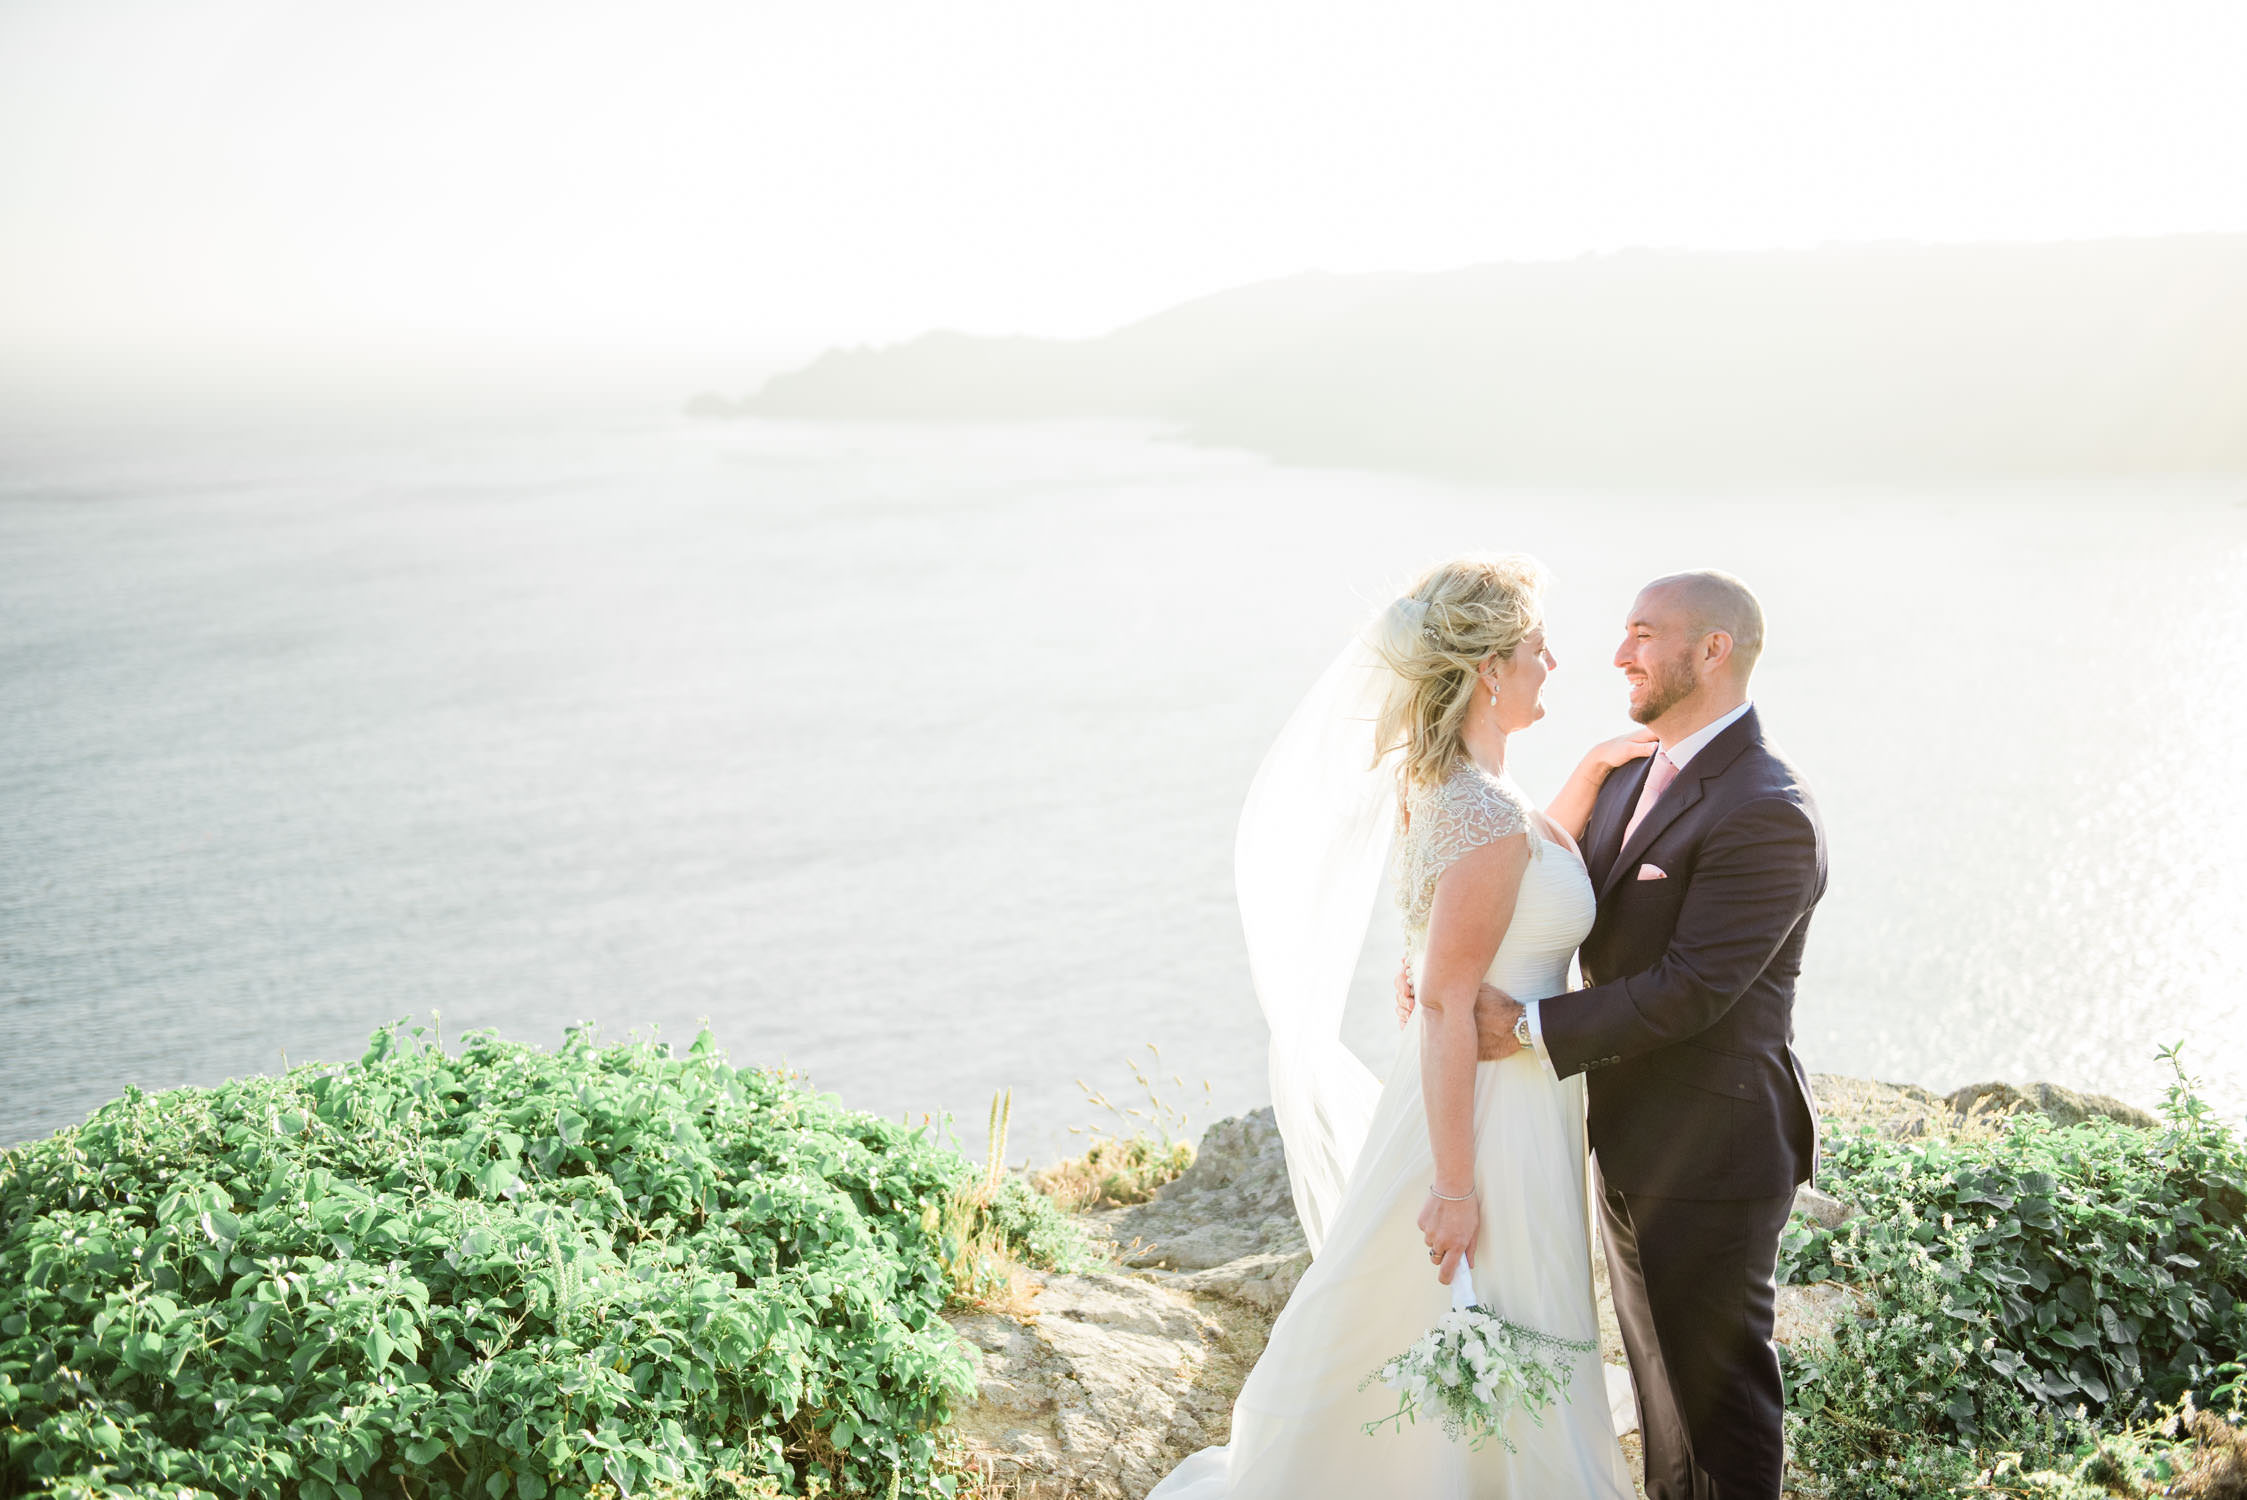 A bride and groom at a cliff in Icard, Guernsey